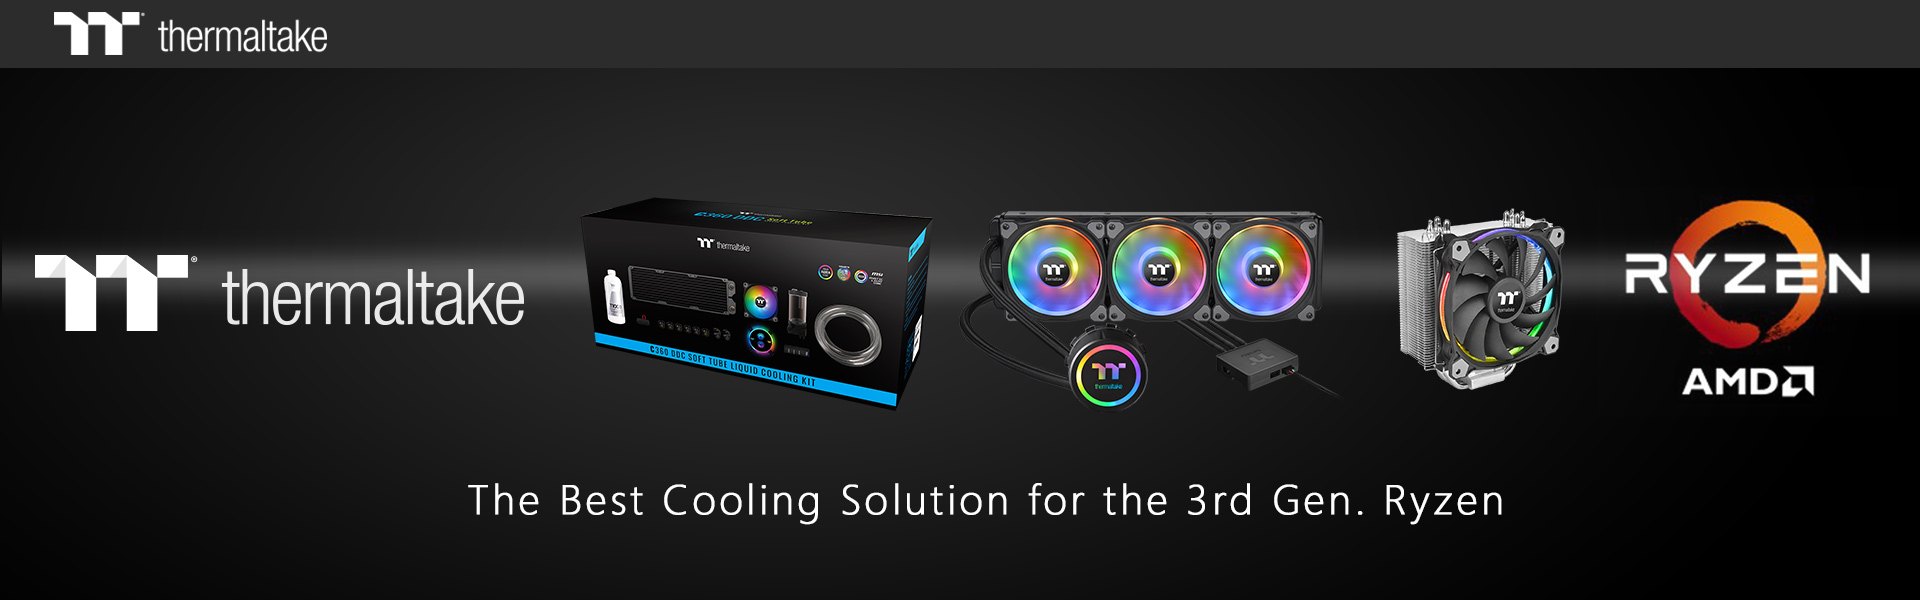 Thermaltake Cooling Solutions Back the Latest Powerful Processors 1